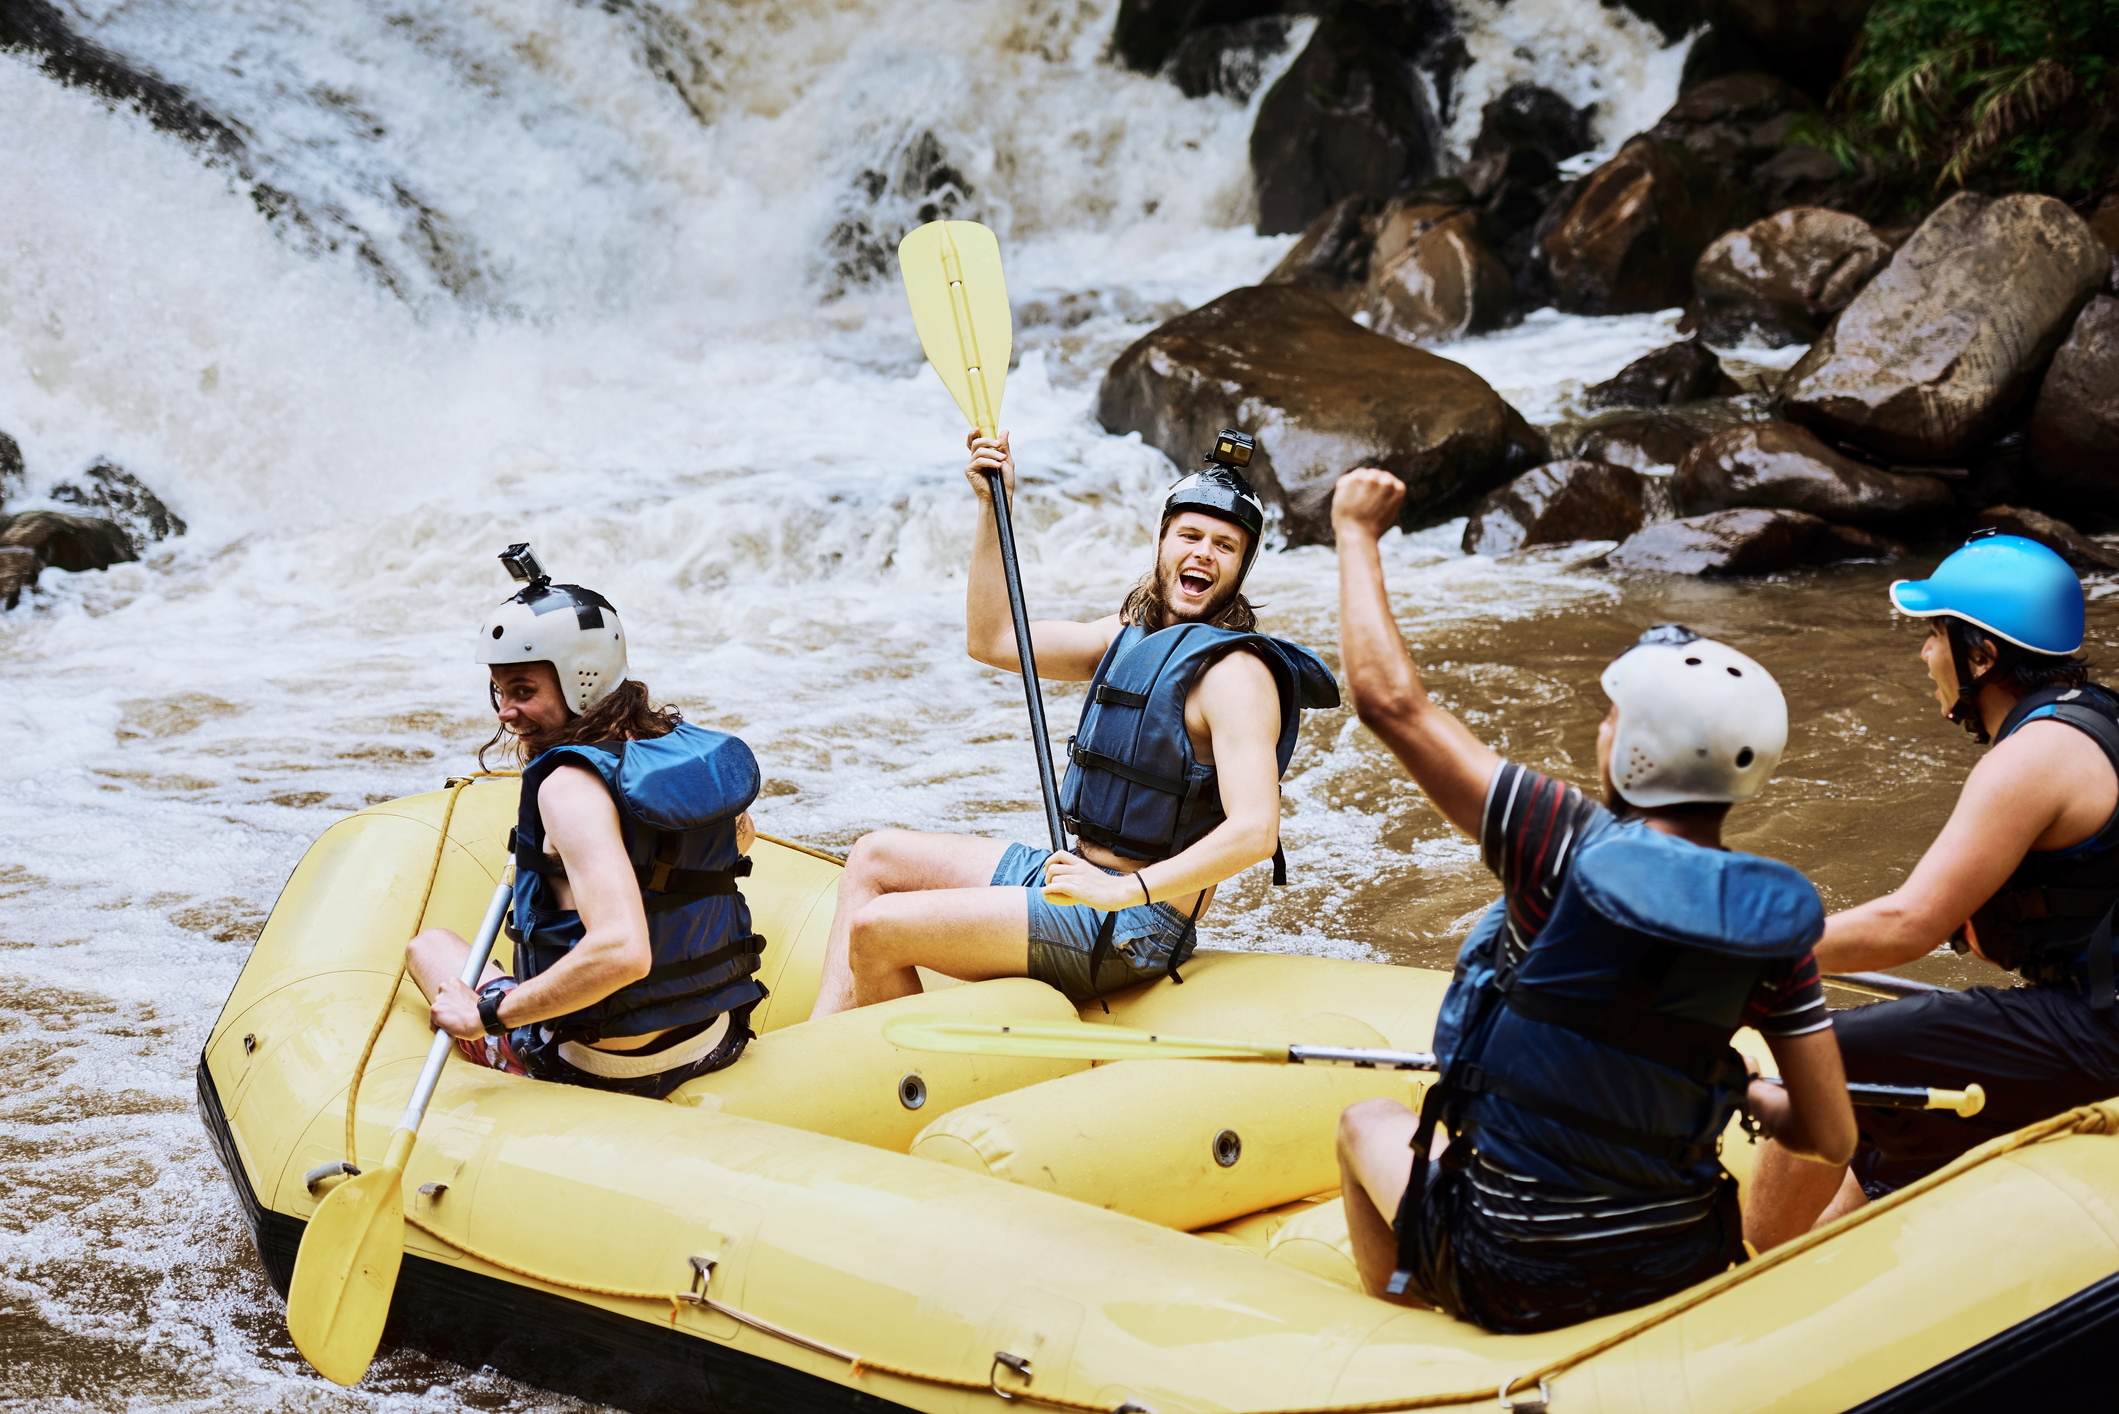 Rafting on rivers and waterfalls